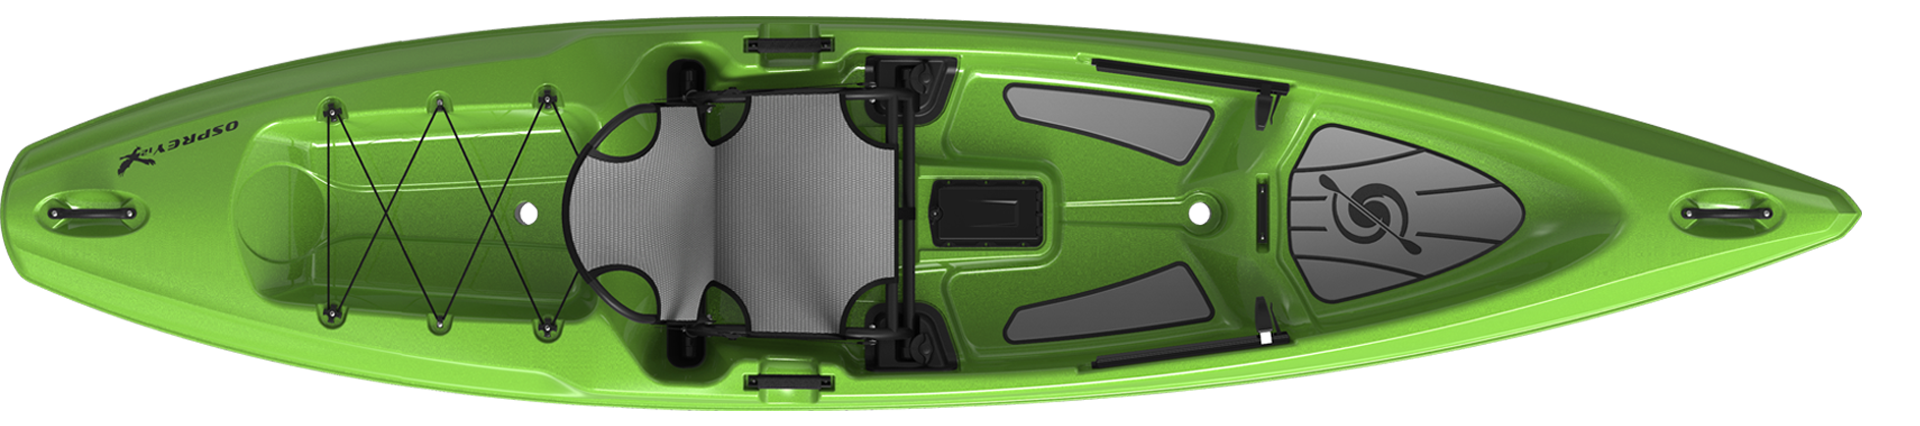 A Top View of The Hurricane Osprey 120